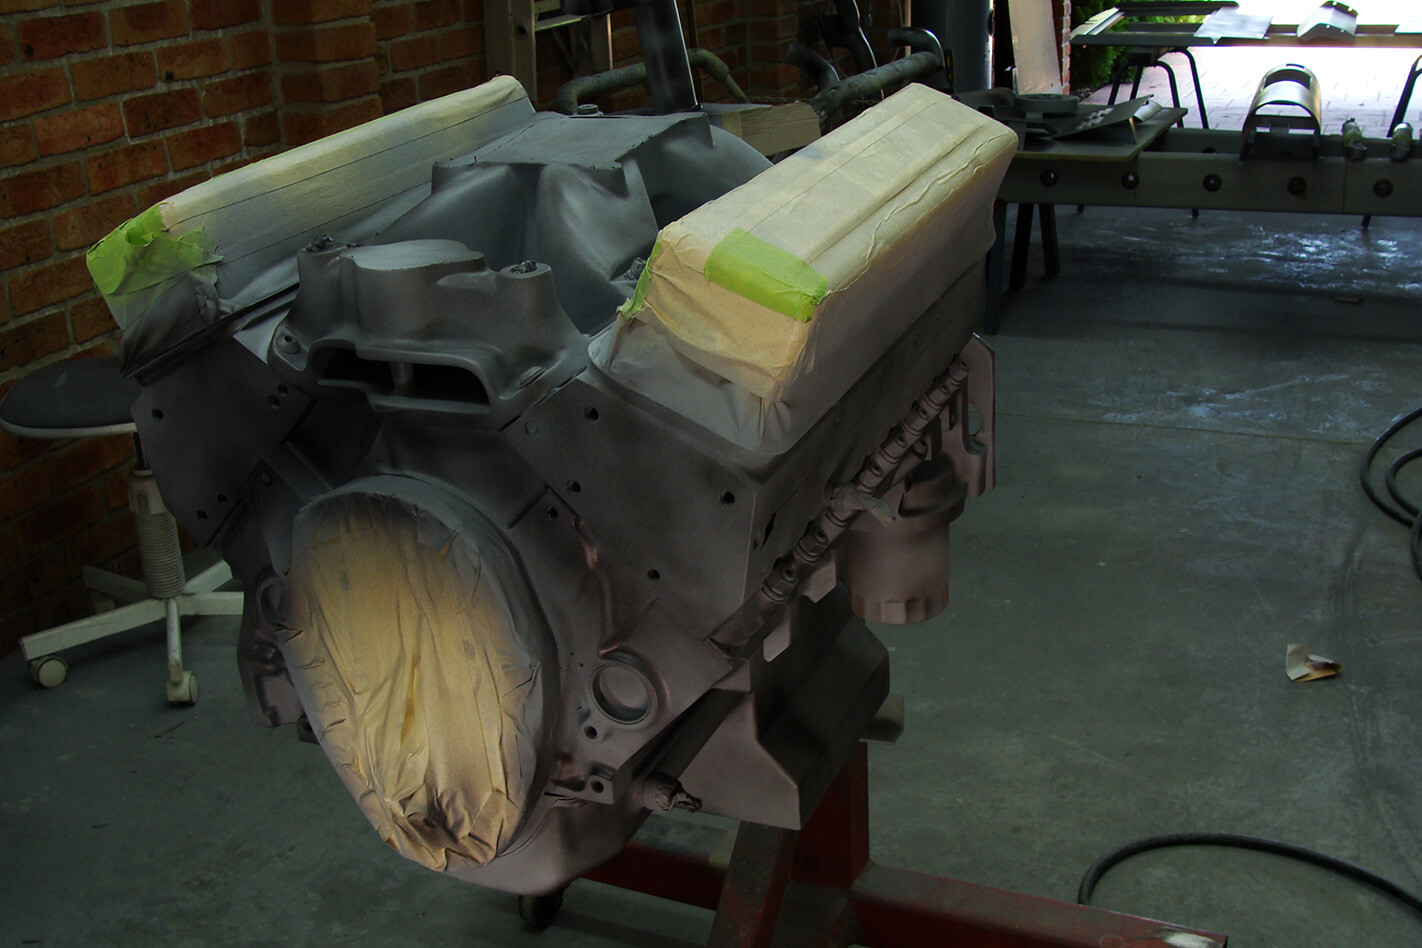 Painting an Engine with VHT Engine Enamel - Restoration of 1972 Plymouth  Satellite Sebring Plus 